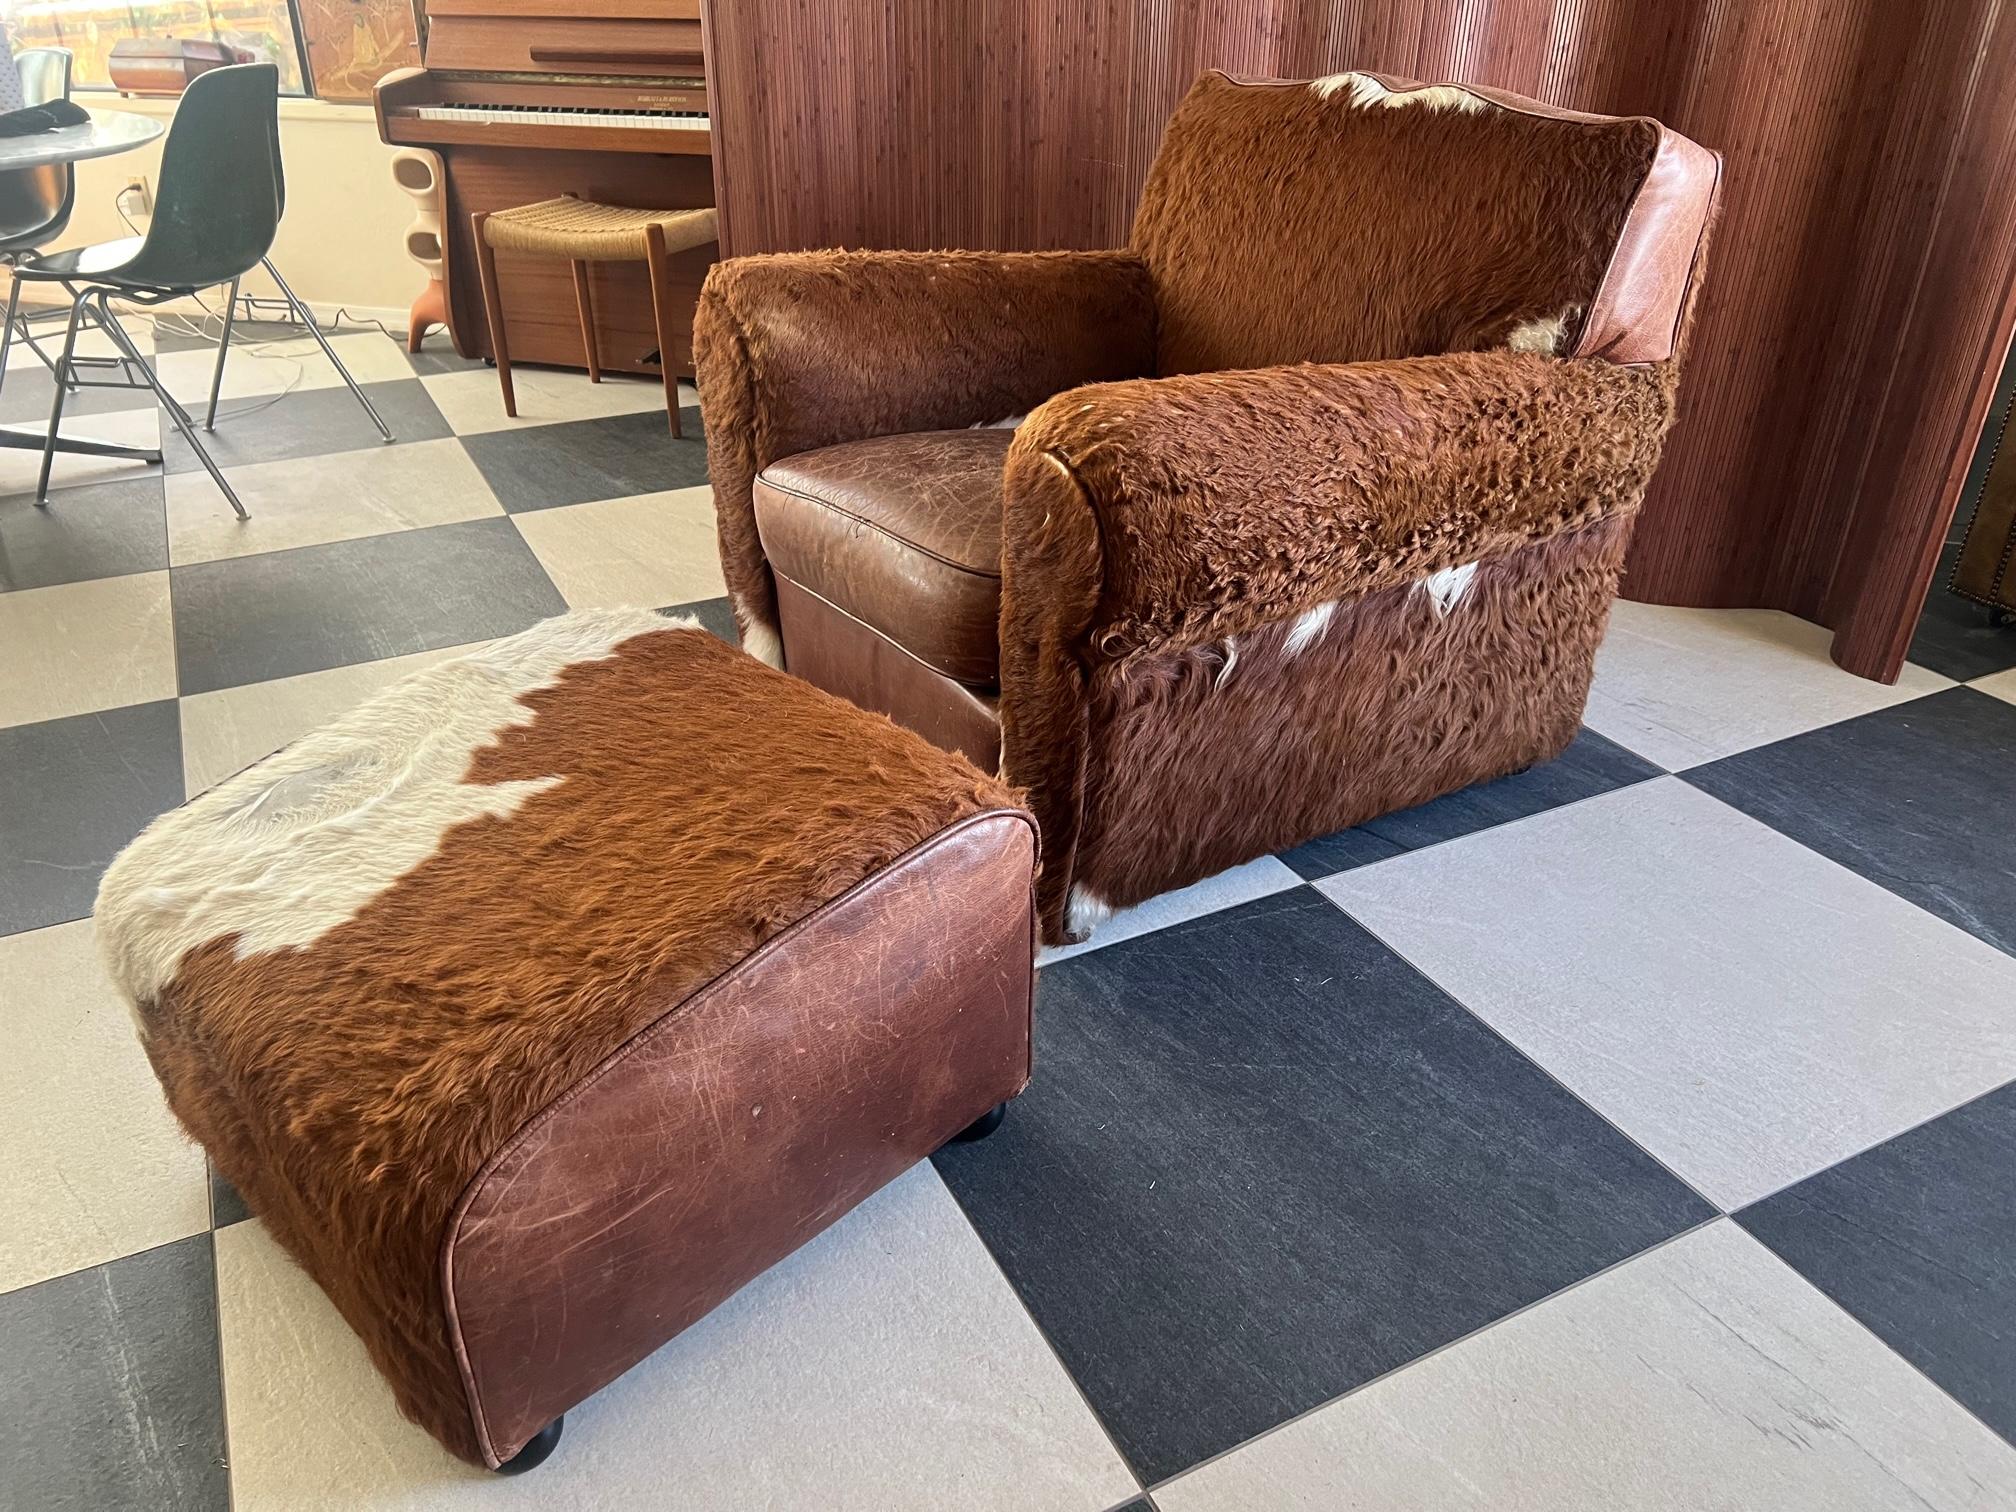 A chair that western dreams are made of. Gorgeous top grain leather and tri-color hair on hide. Exquisitely made with the utmost care and attention to detail, this chair is one of a kind!

The frame is a combination of hardwood and furniture grade